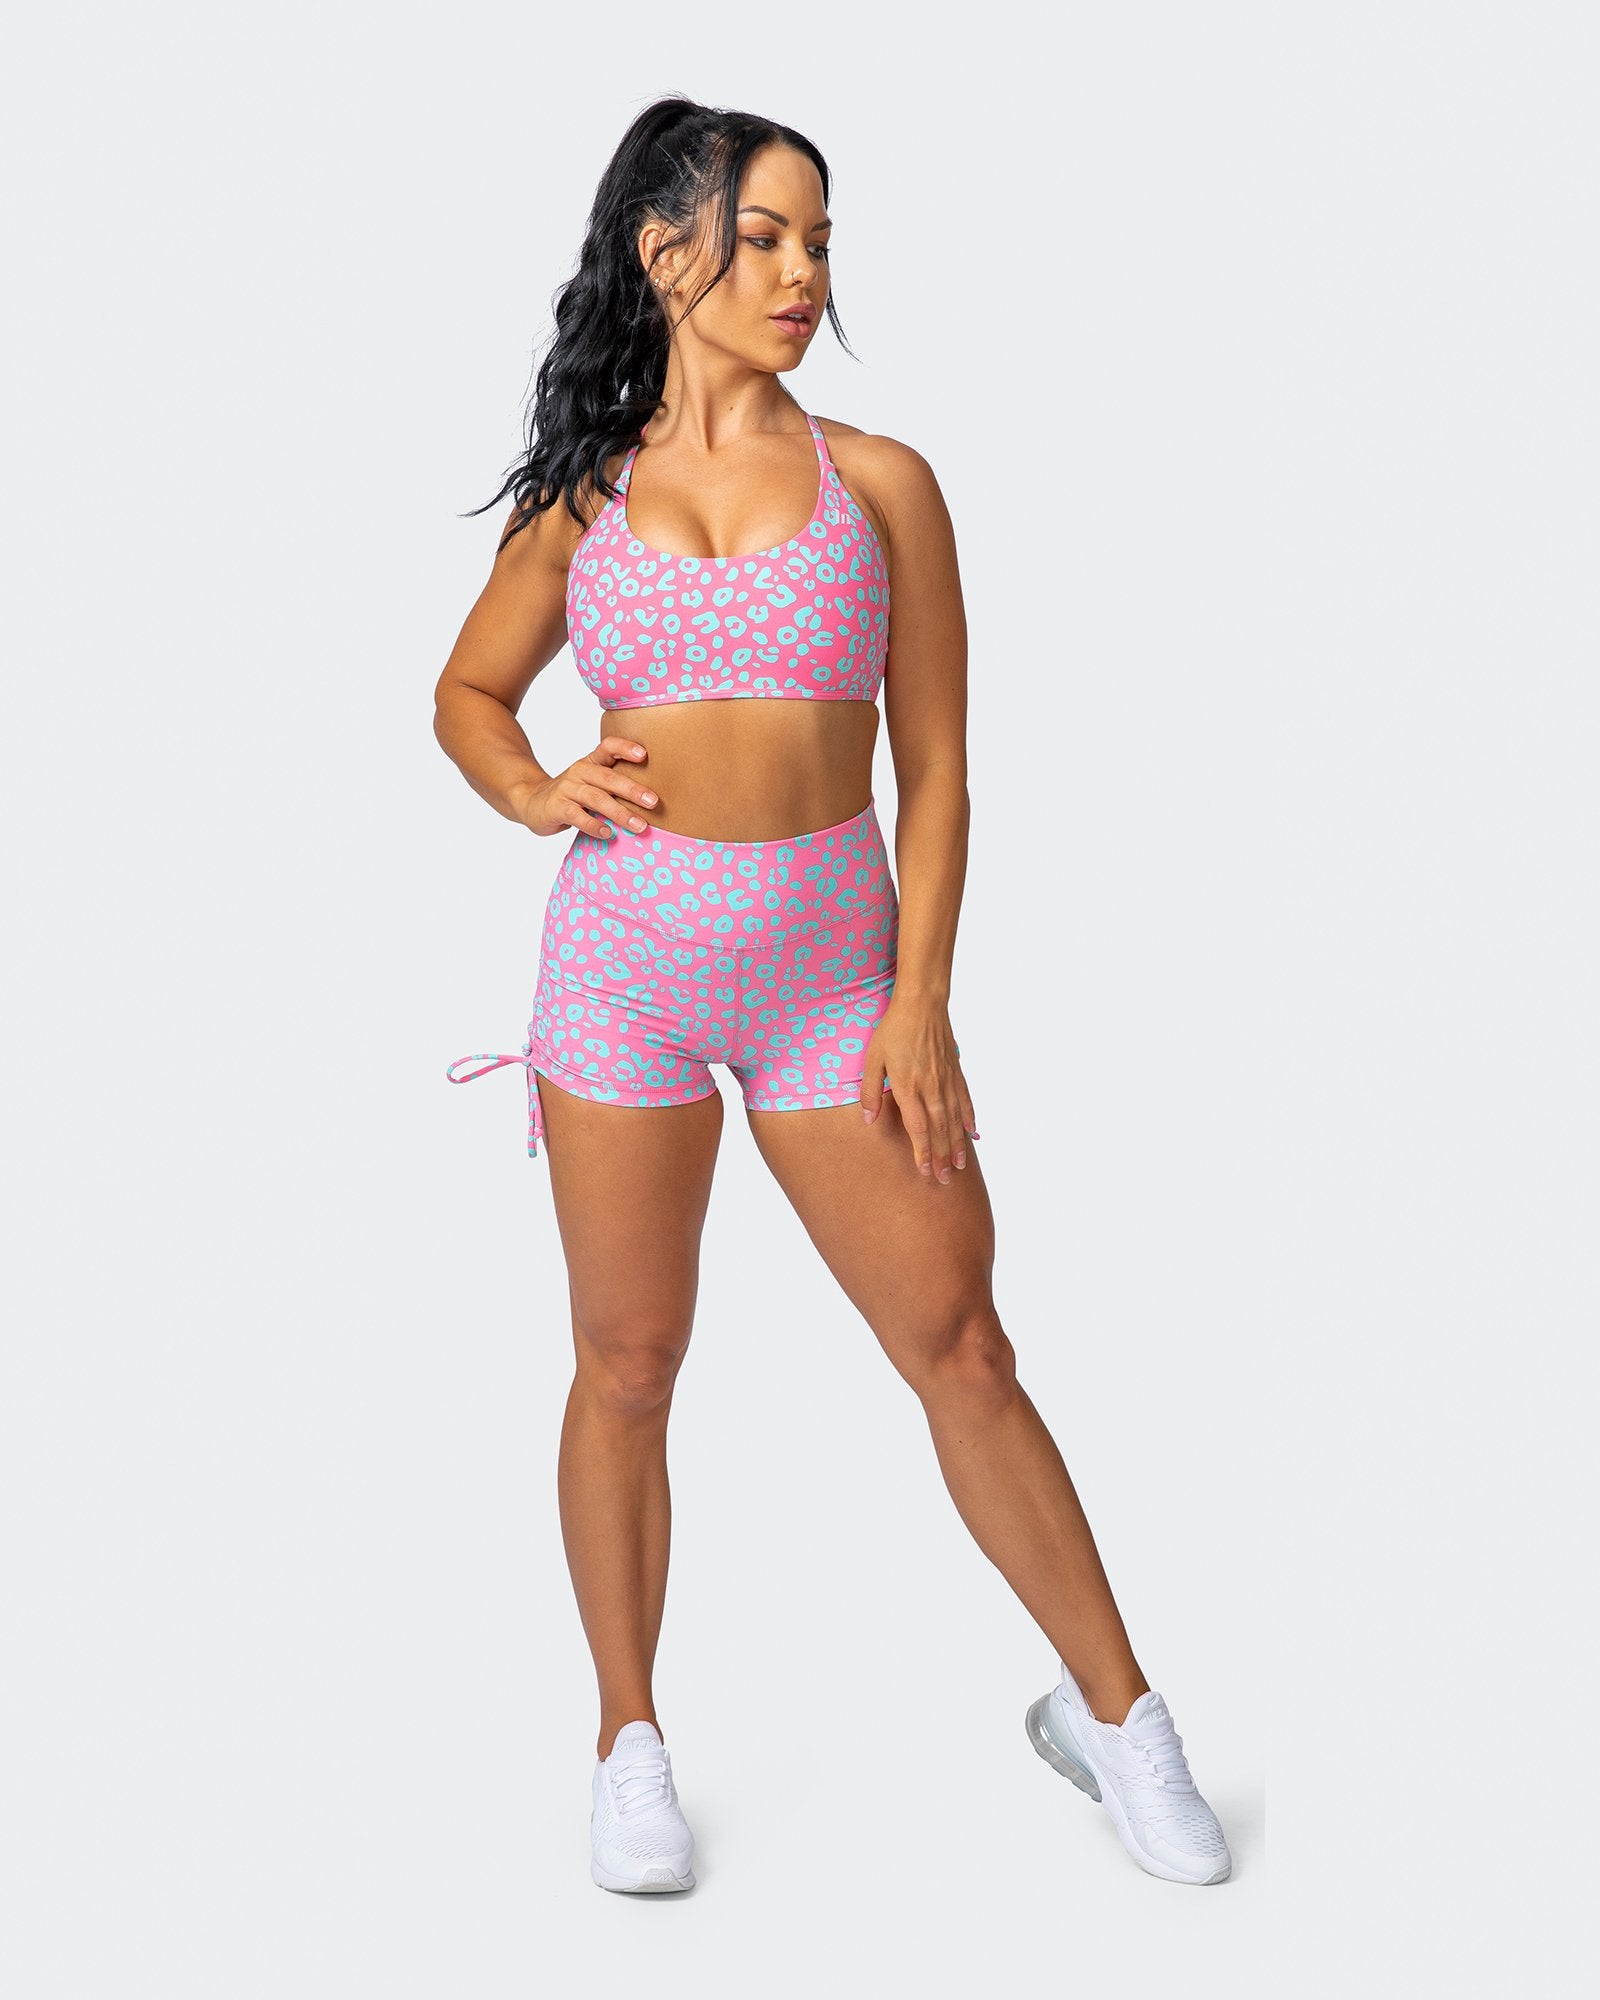 musclenation SIGNATURE SCRUNCH TIE UP BOOTY SHORTS Cotton Candy Cheetah Print